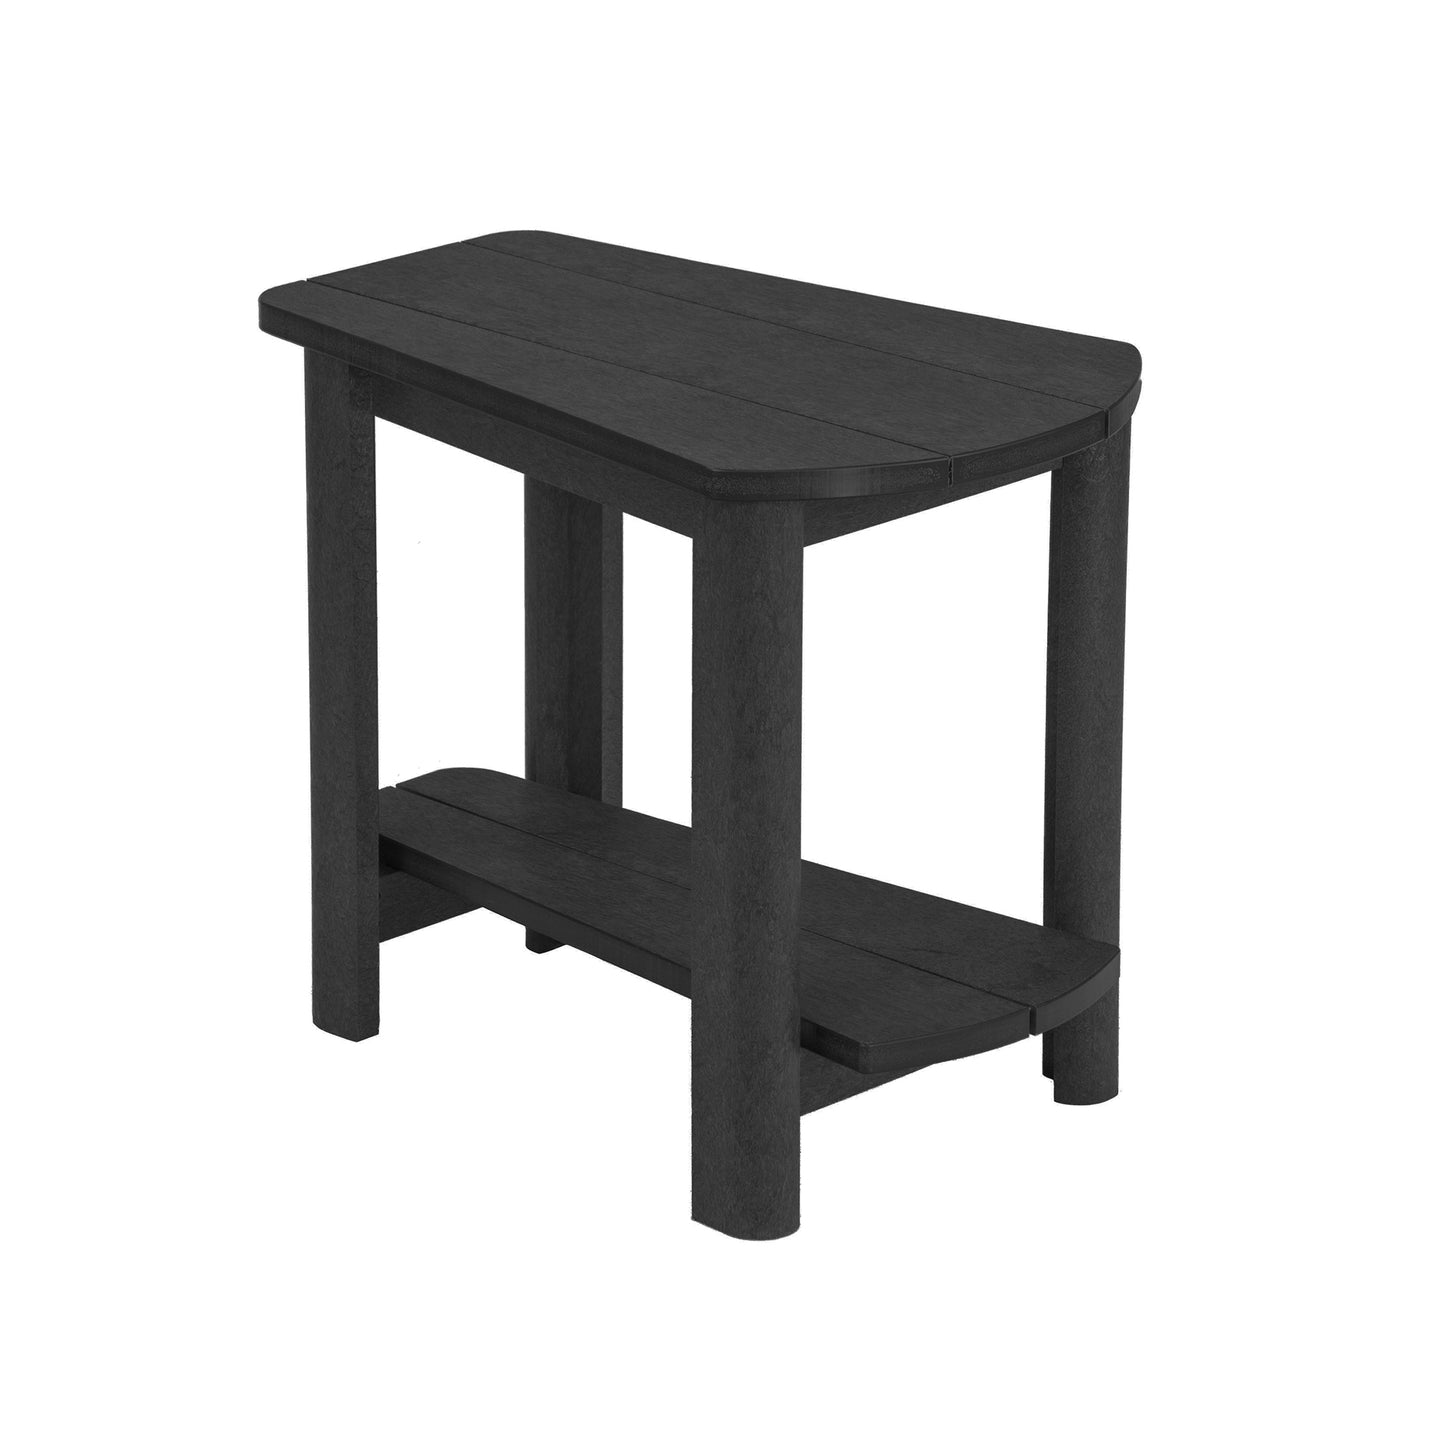 C.R.P. Addy Side Table in Black